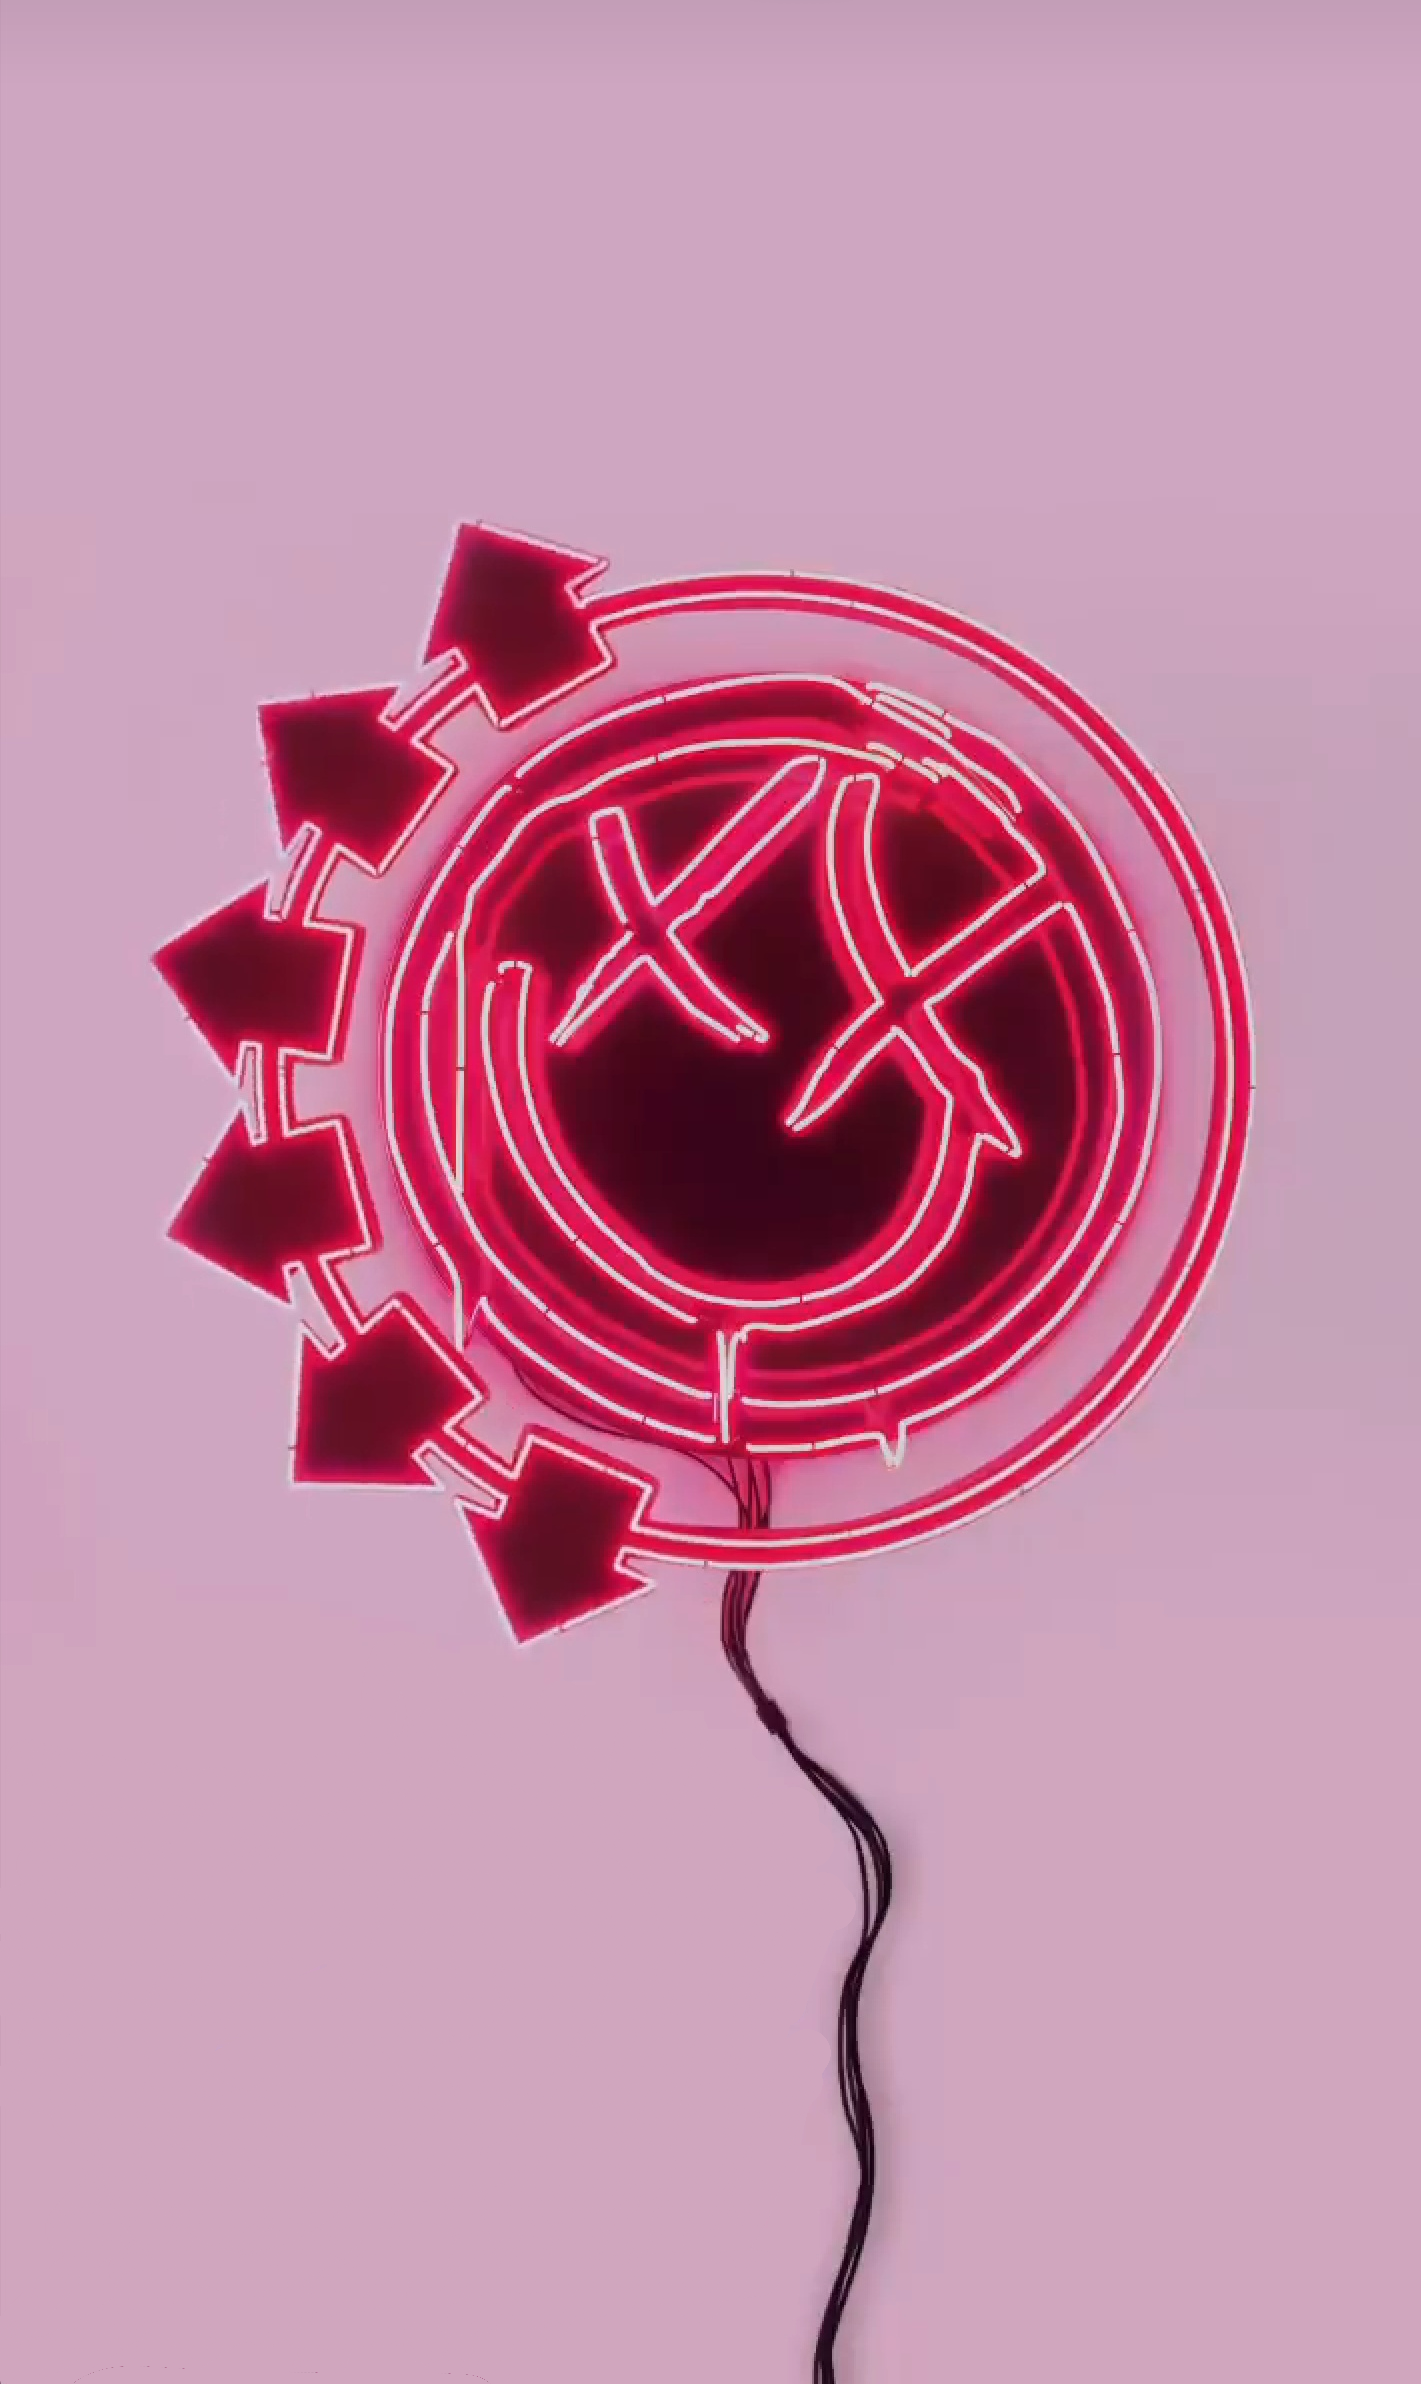 Blink Logo Wallpaper Posted By Michelle Cunningham